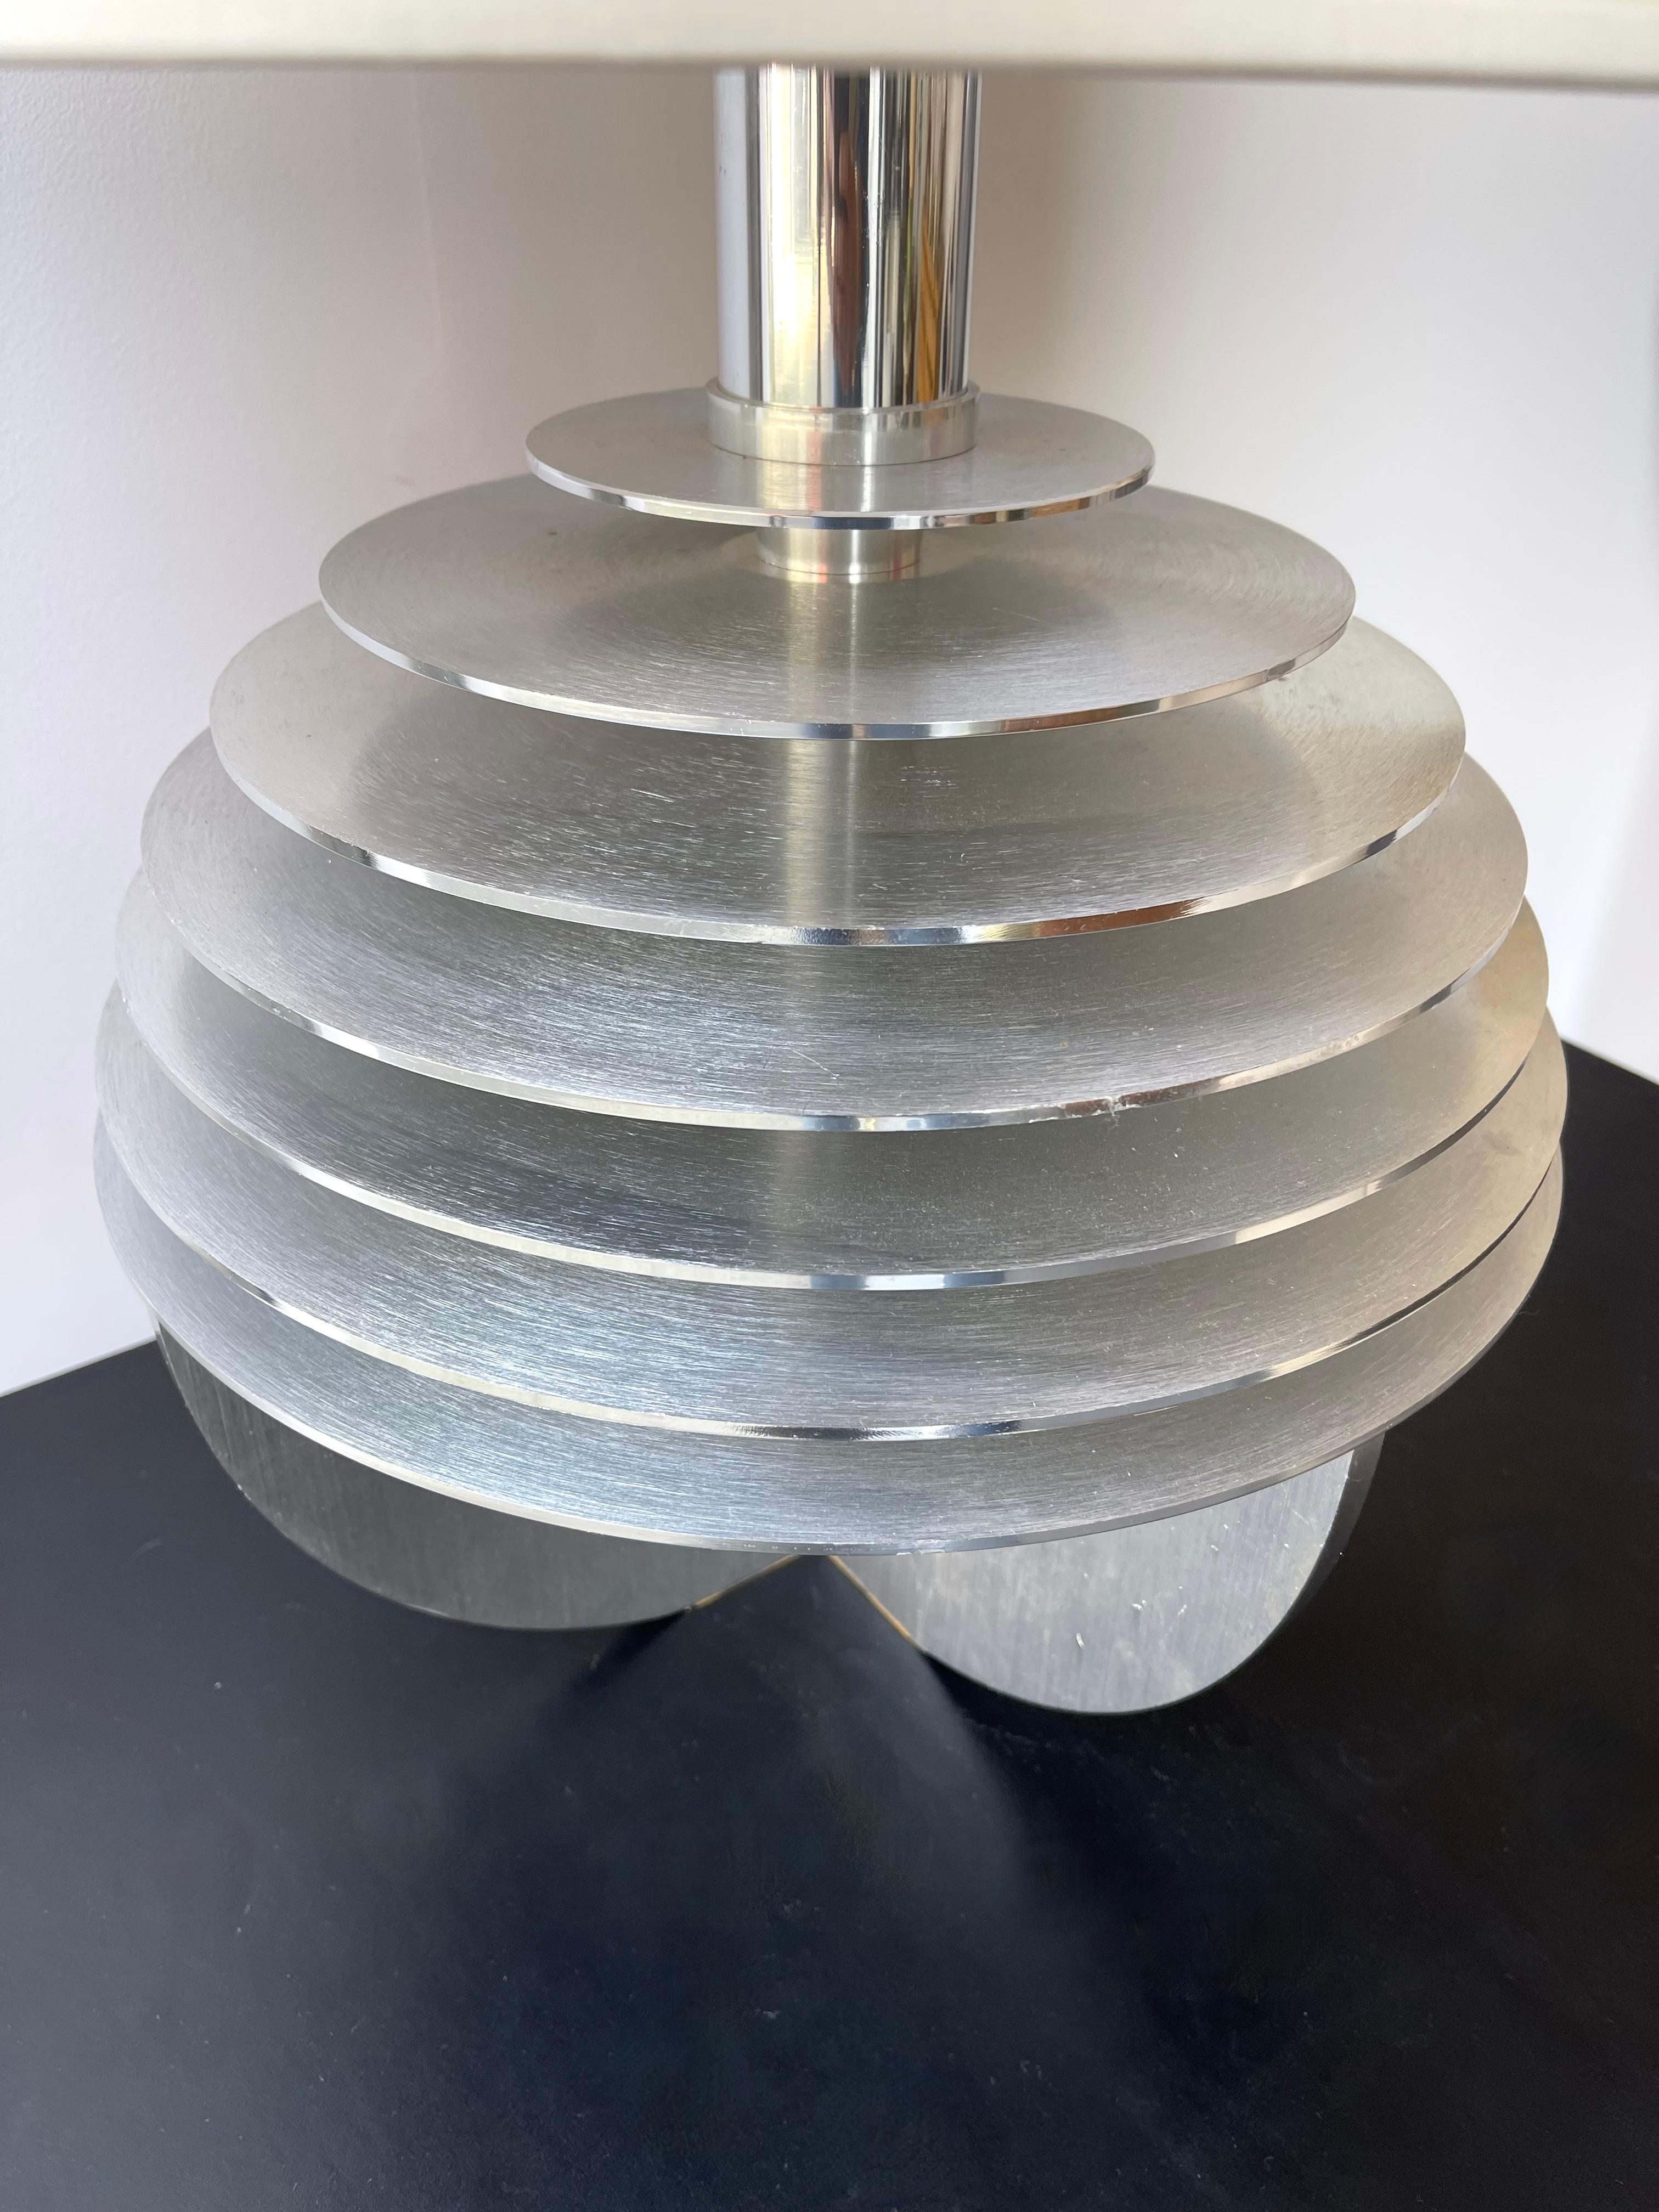 Rare model of Mid-Century Modern Space Age pair of Saturn disc ball lamps in metal by the italian design manufacture Banci. Nice shades made for. Famous design like Stilnovo, Joe Colombo, Arteluce, Arredoluce, Lumi, Luci, Rggiani, Sciolari, Werner